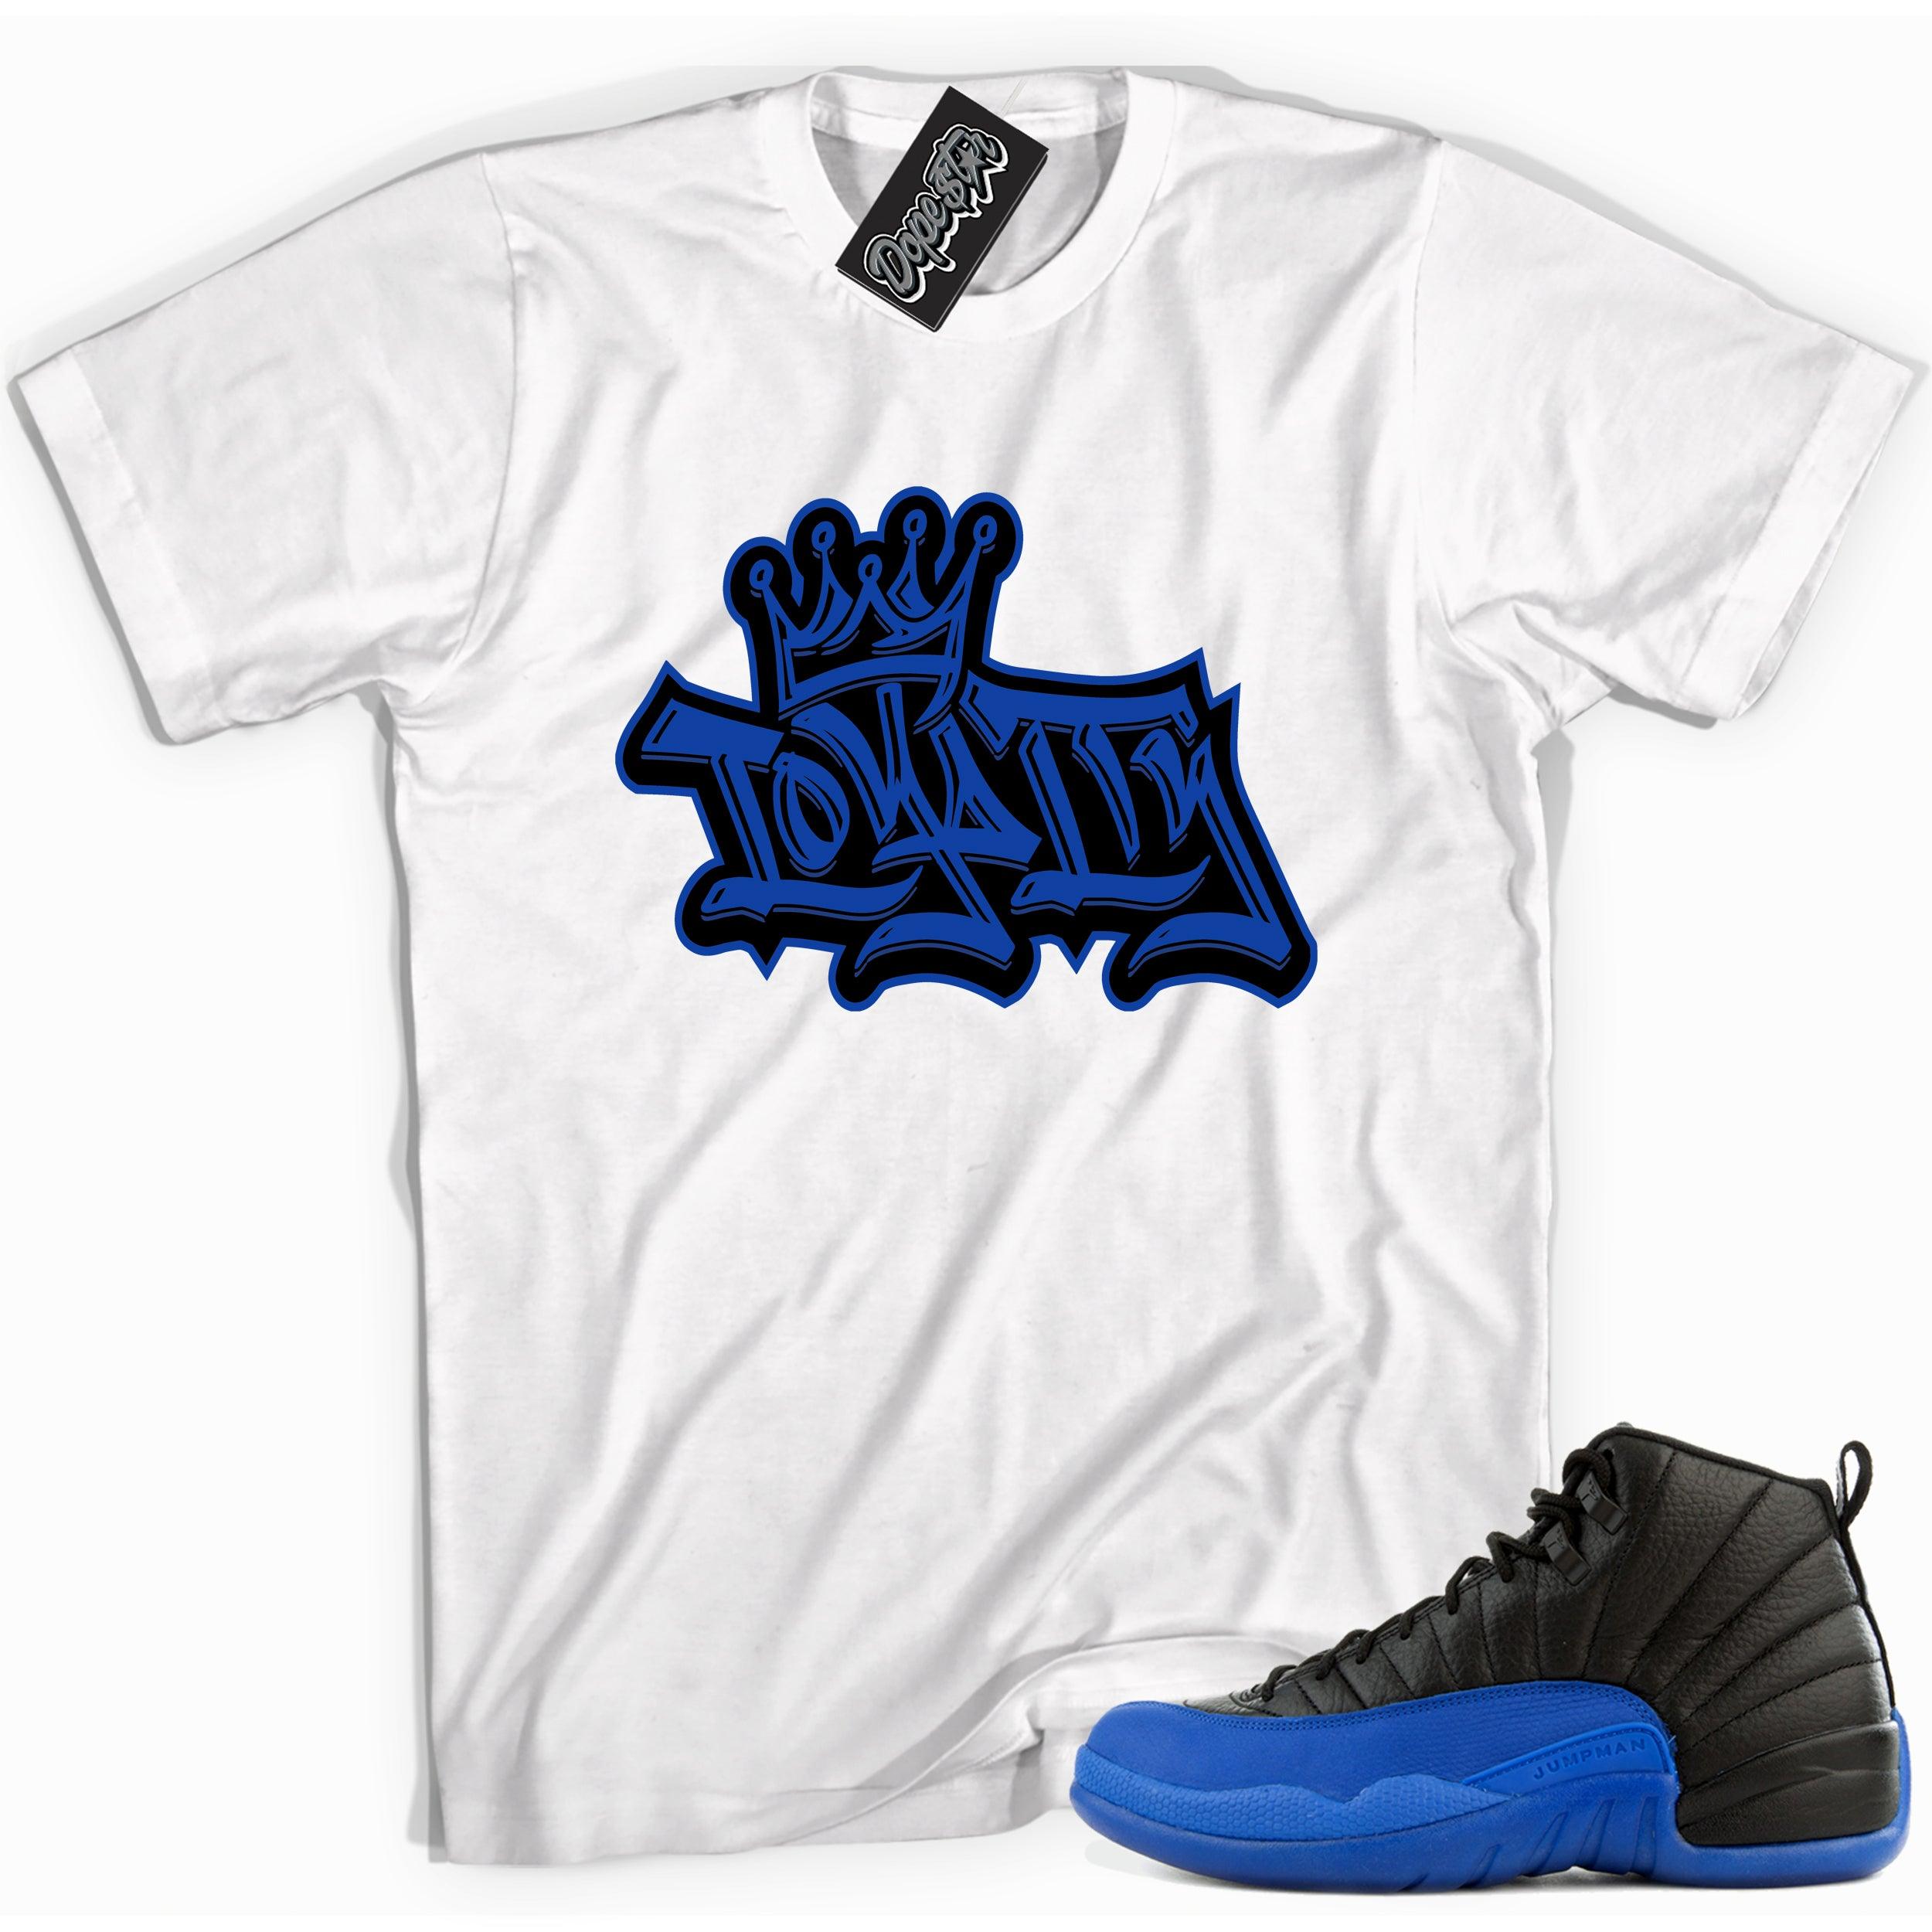 Cool white graphic tee with 'loyalty' print, that perfectly matches Air Jordan 12 Retro Black Game Royal sneakers.